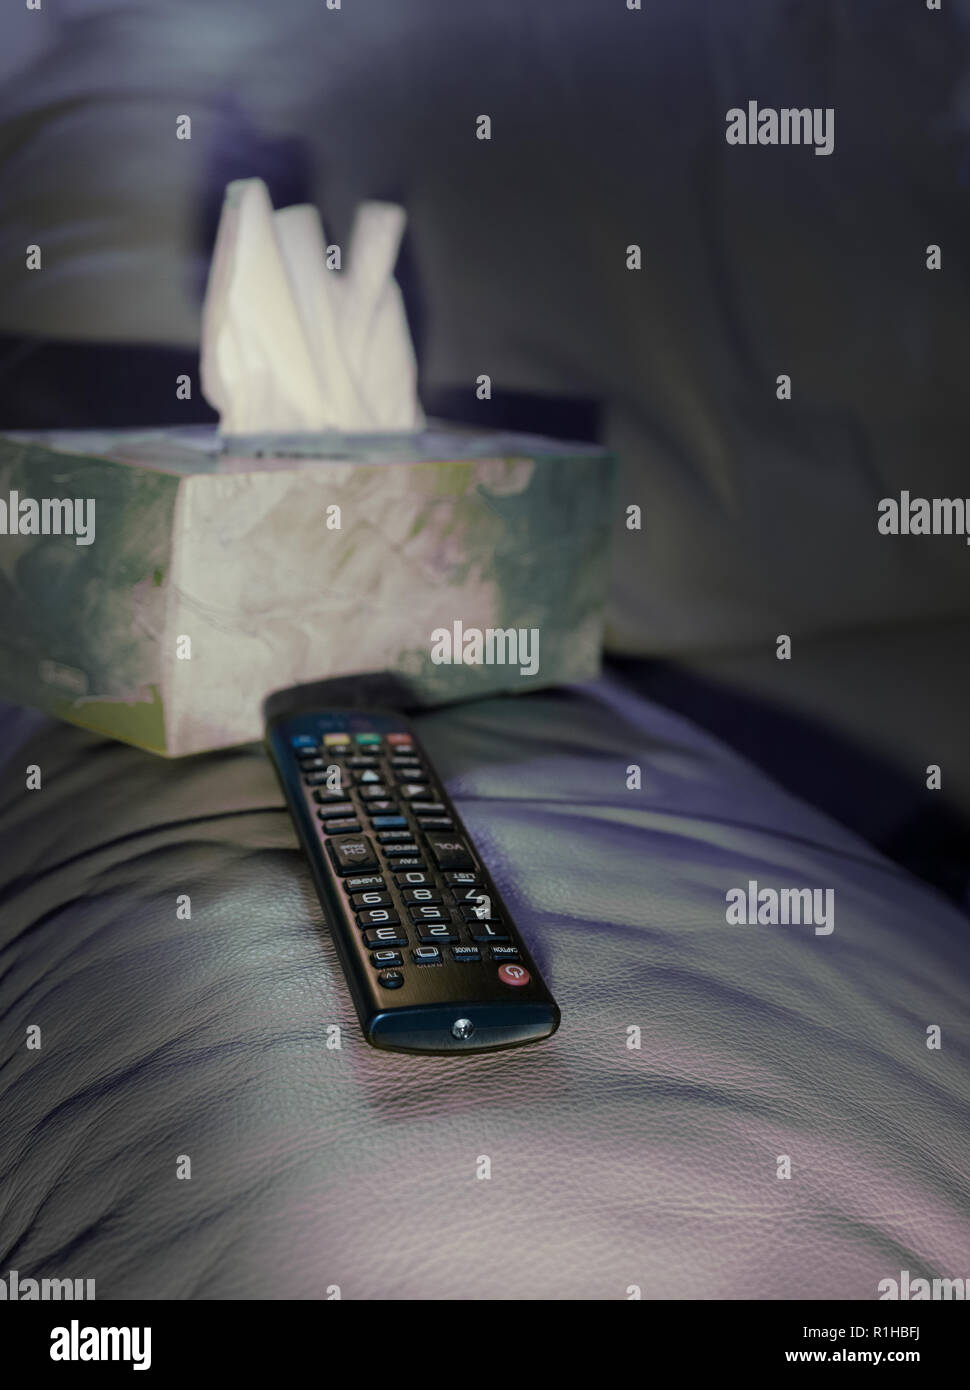 On the arm of the chair there is a remote control and a box of tissues. Reflections of the light of the tv illuminate the space. Stock Photo